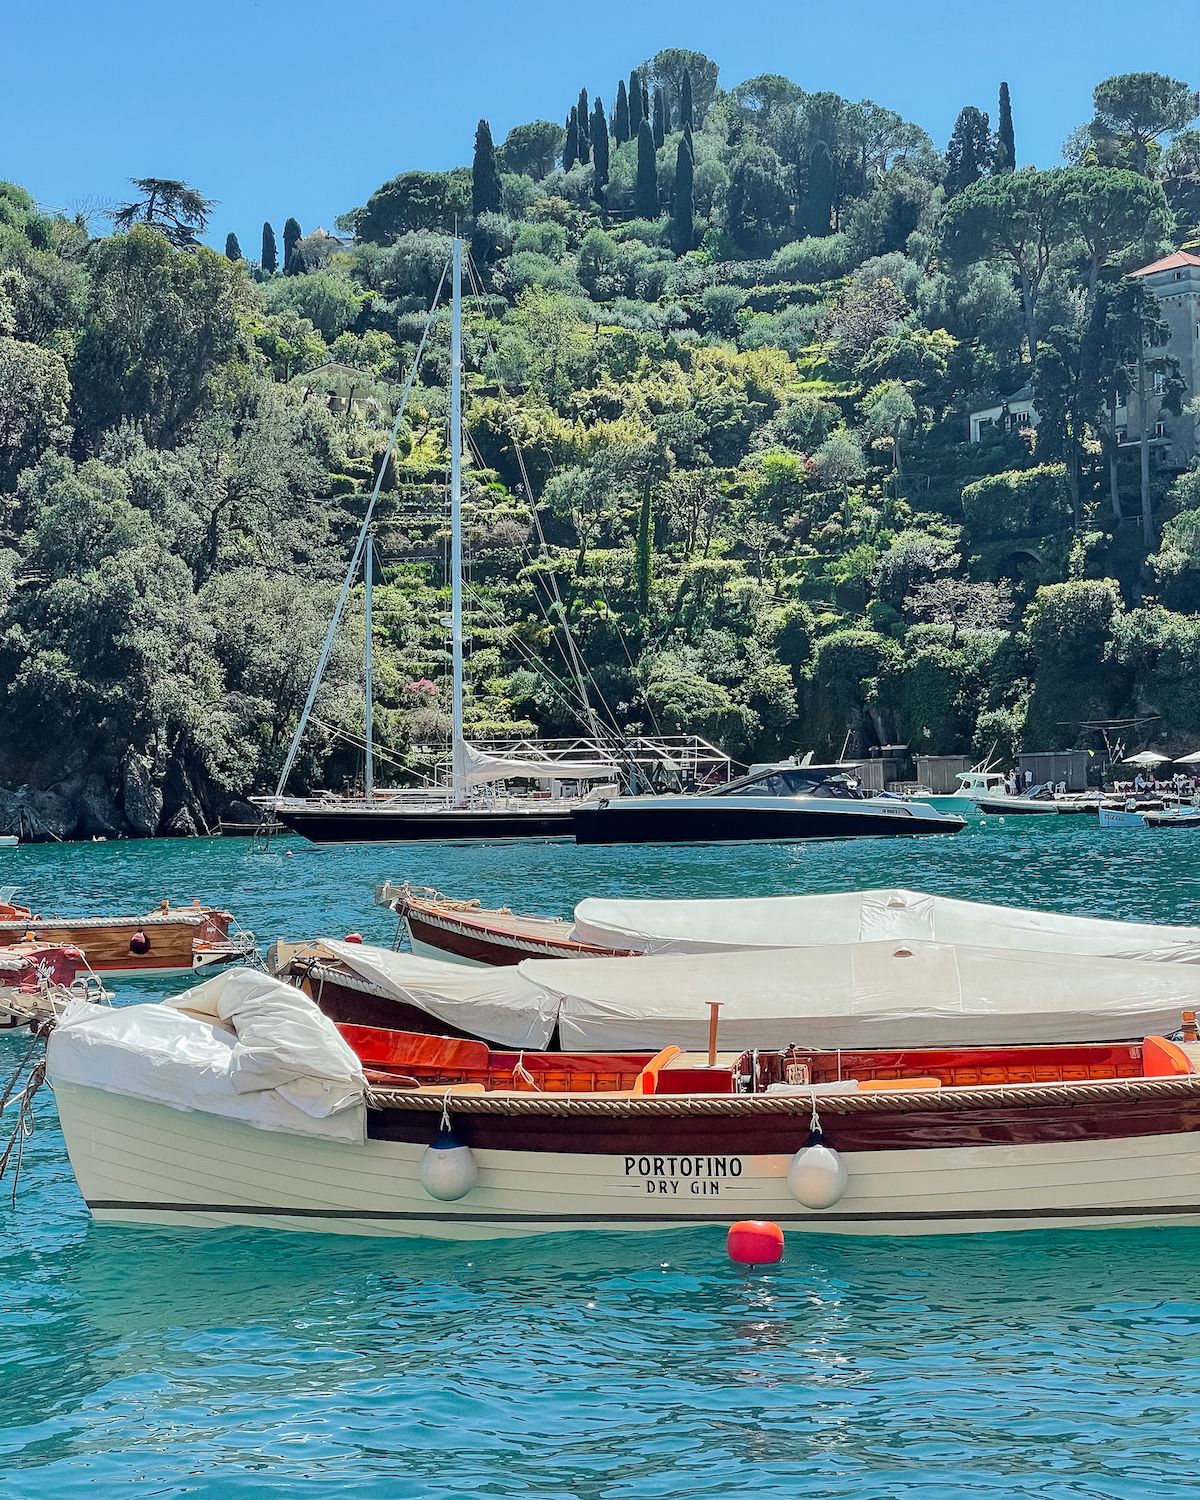 A chic white and brown boat in the harbour of Portofino